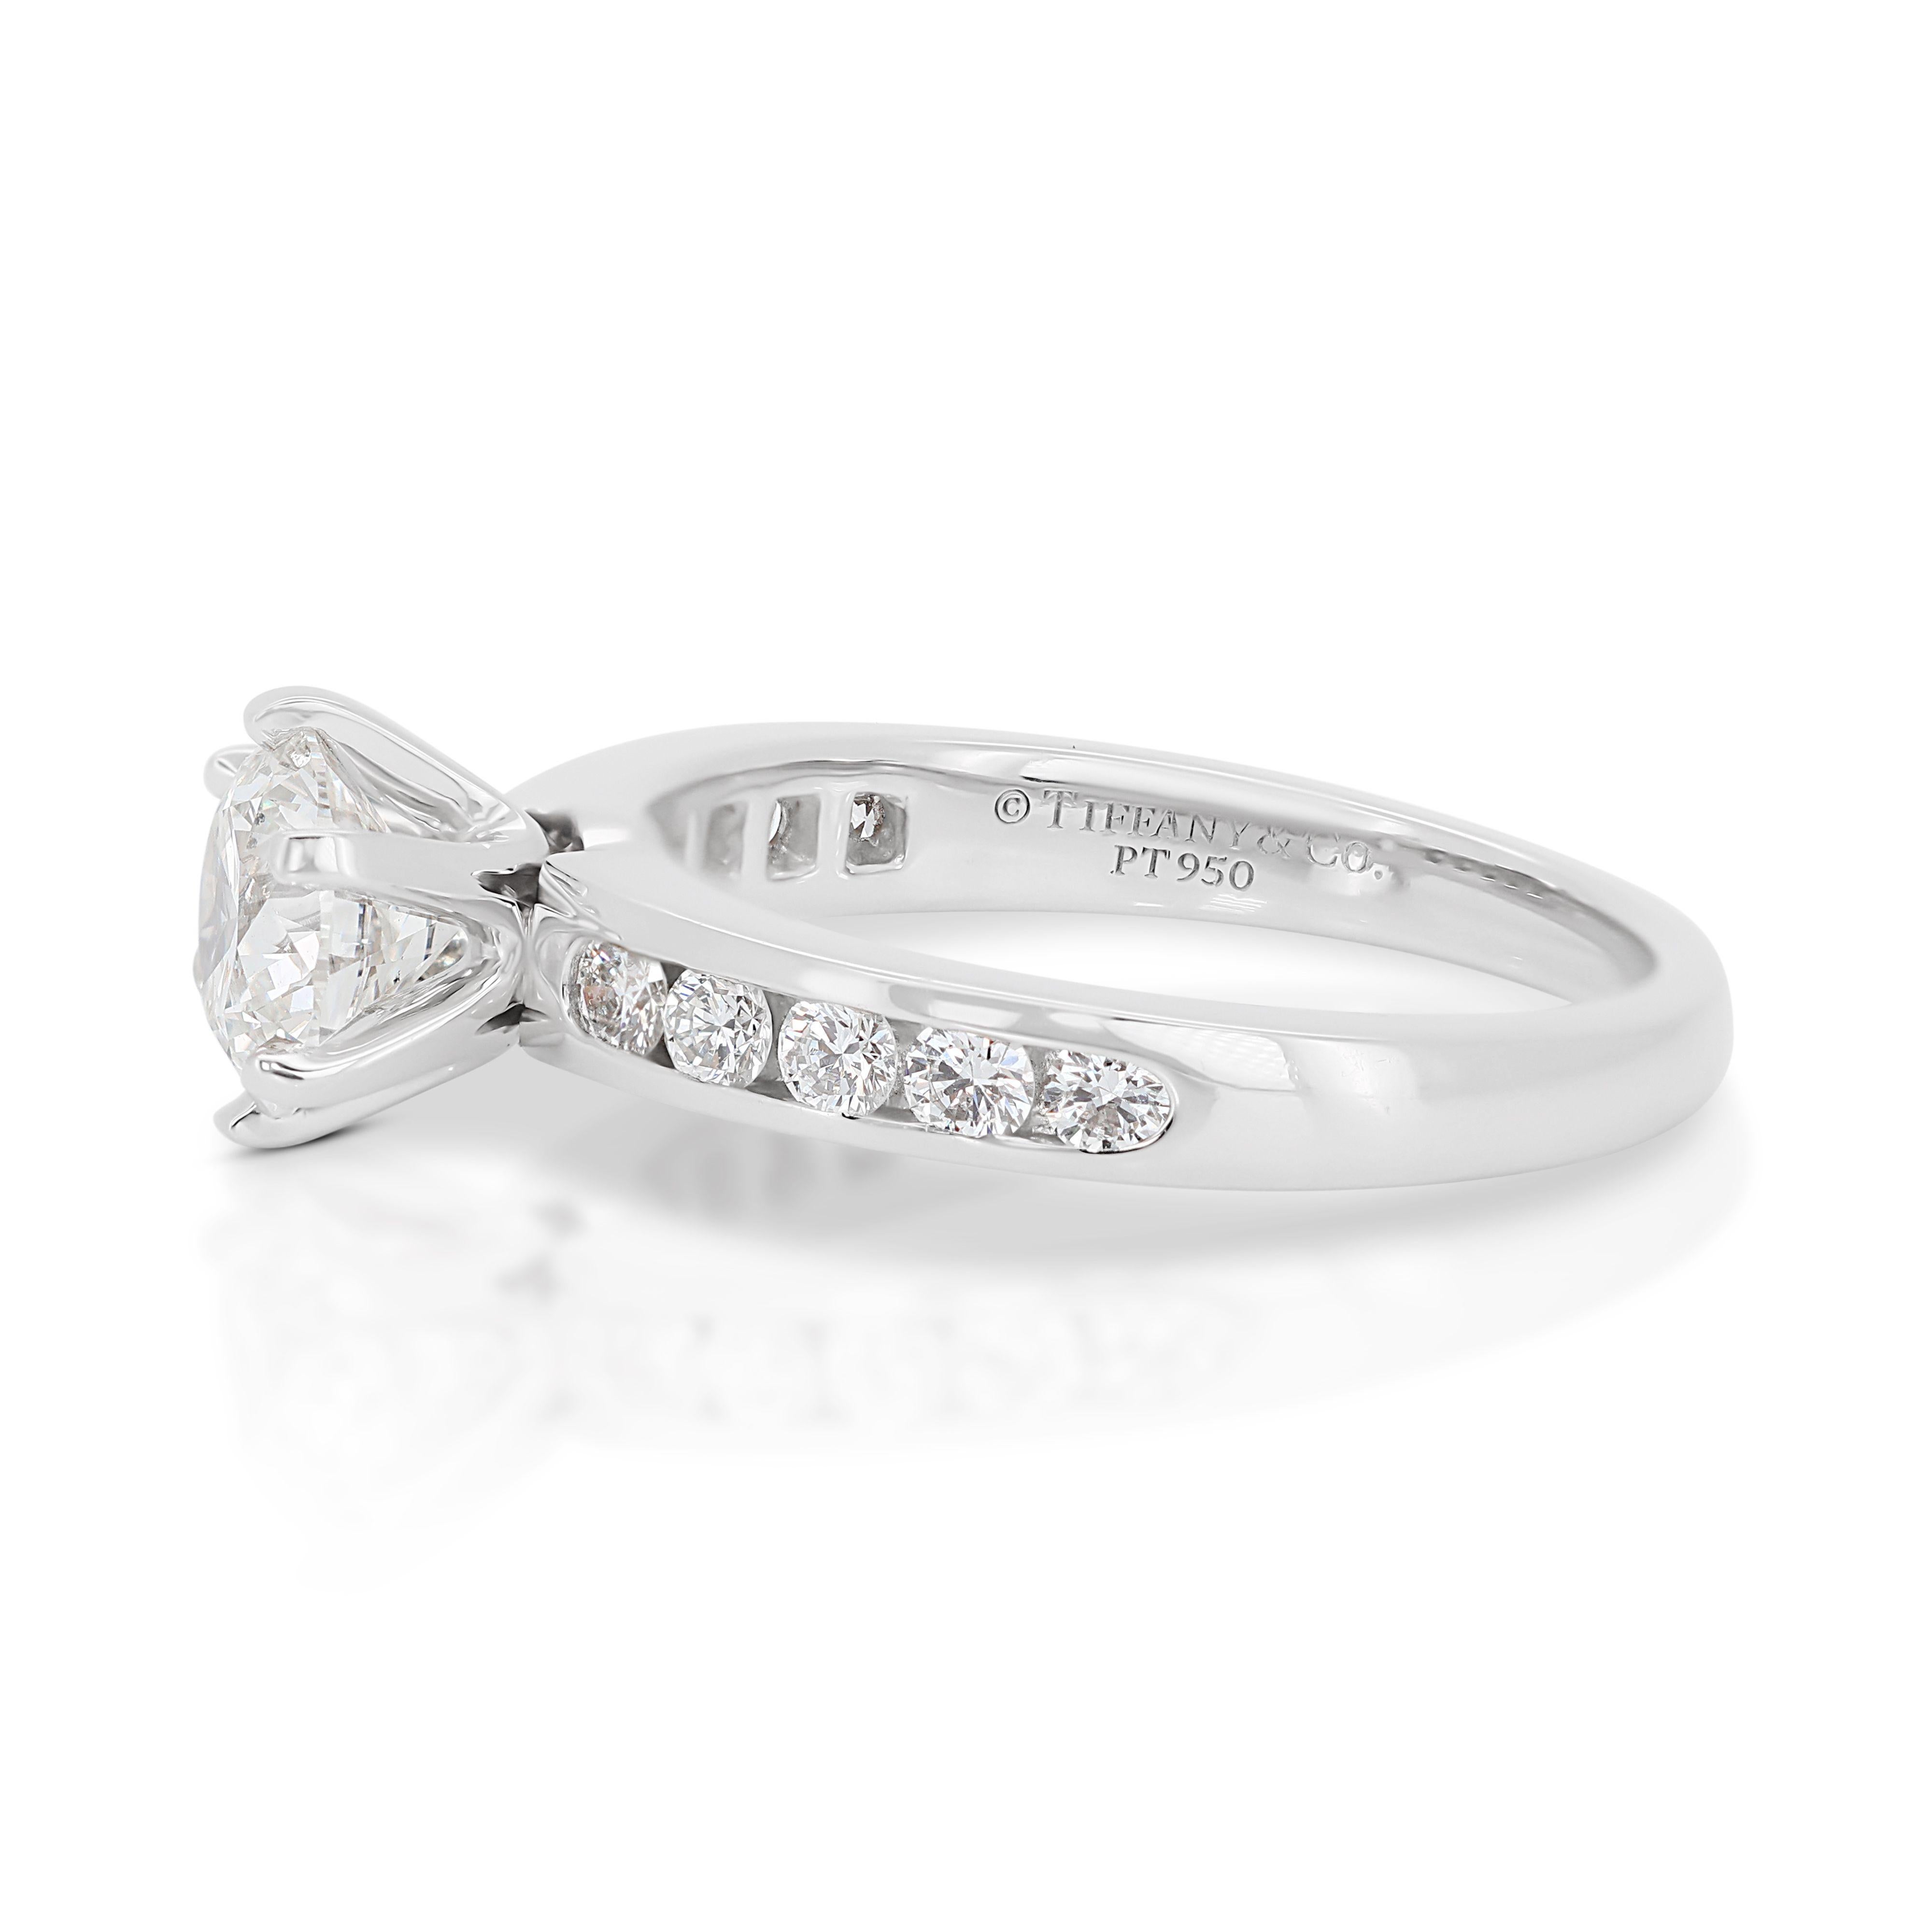 1.02ct Tiffany & Co. Diamond Ring with Sparkling Halo For Sale 2